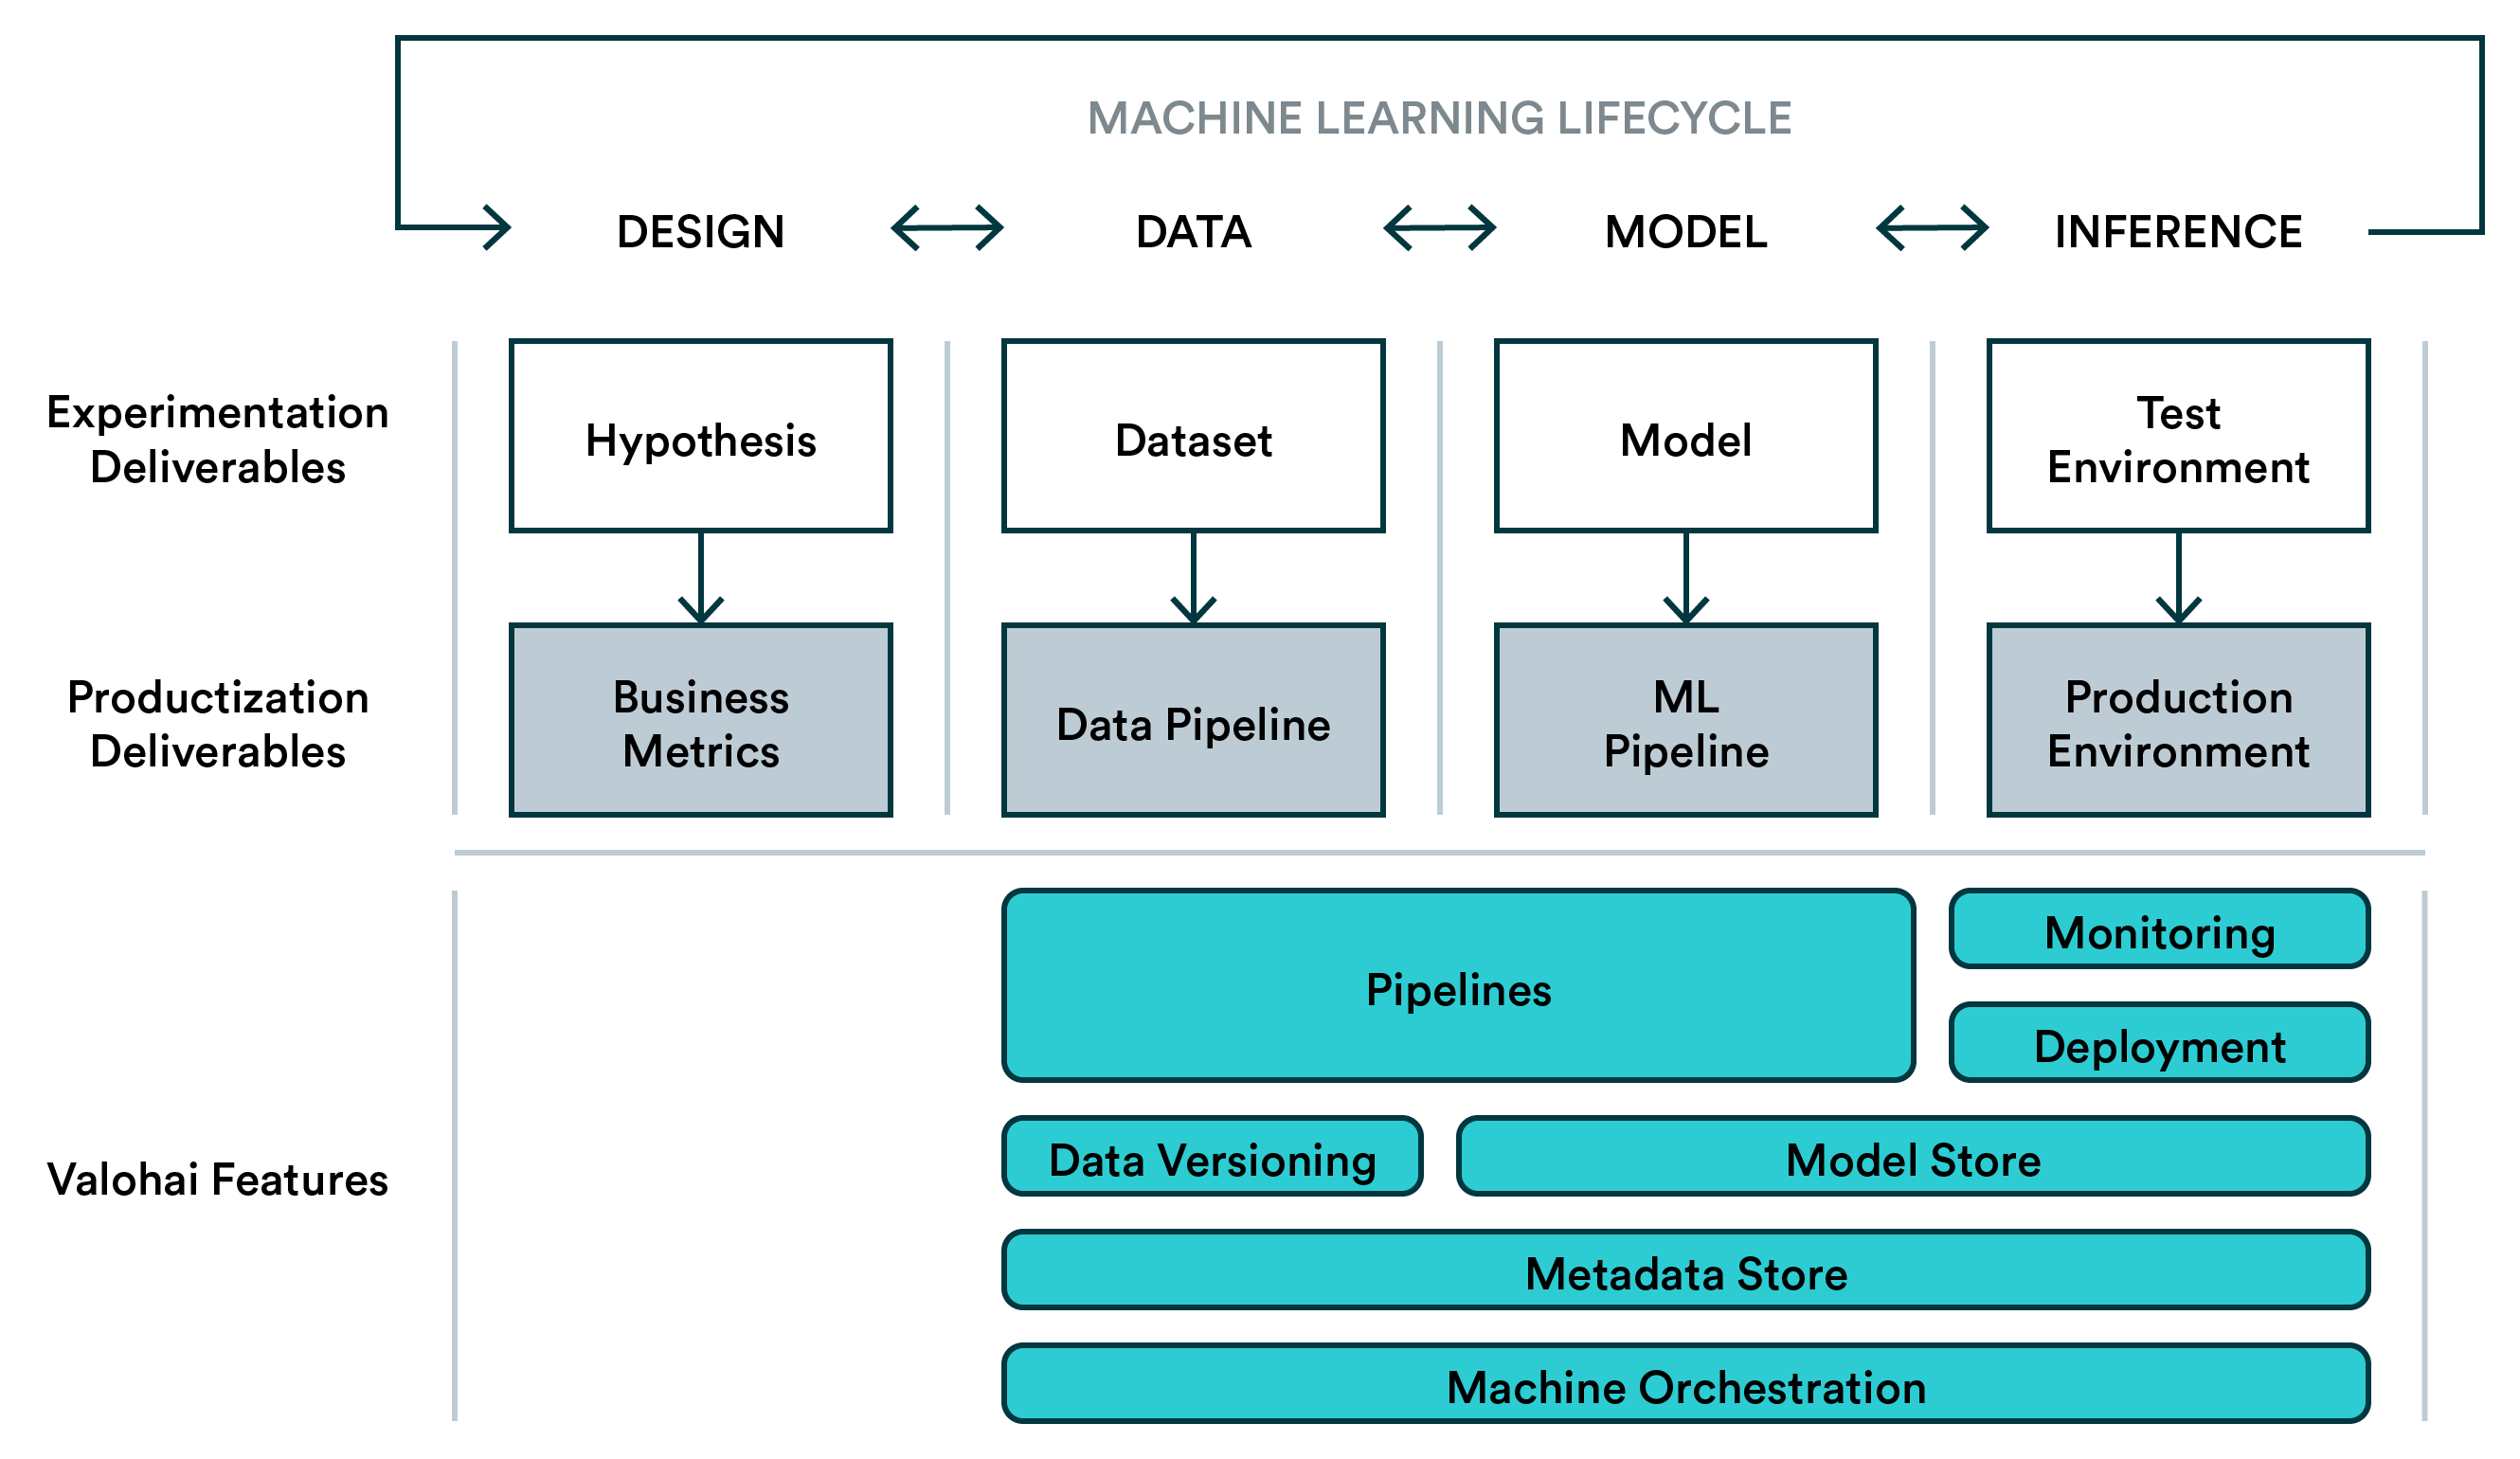 Machine Learning Lifecycle - Experimentation & Productization - With Valohai features